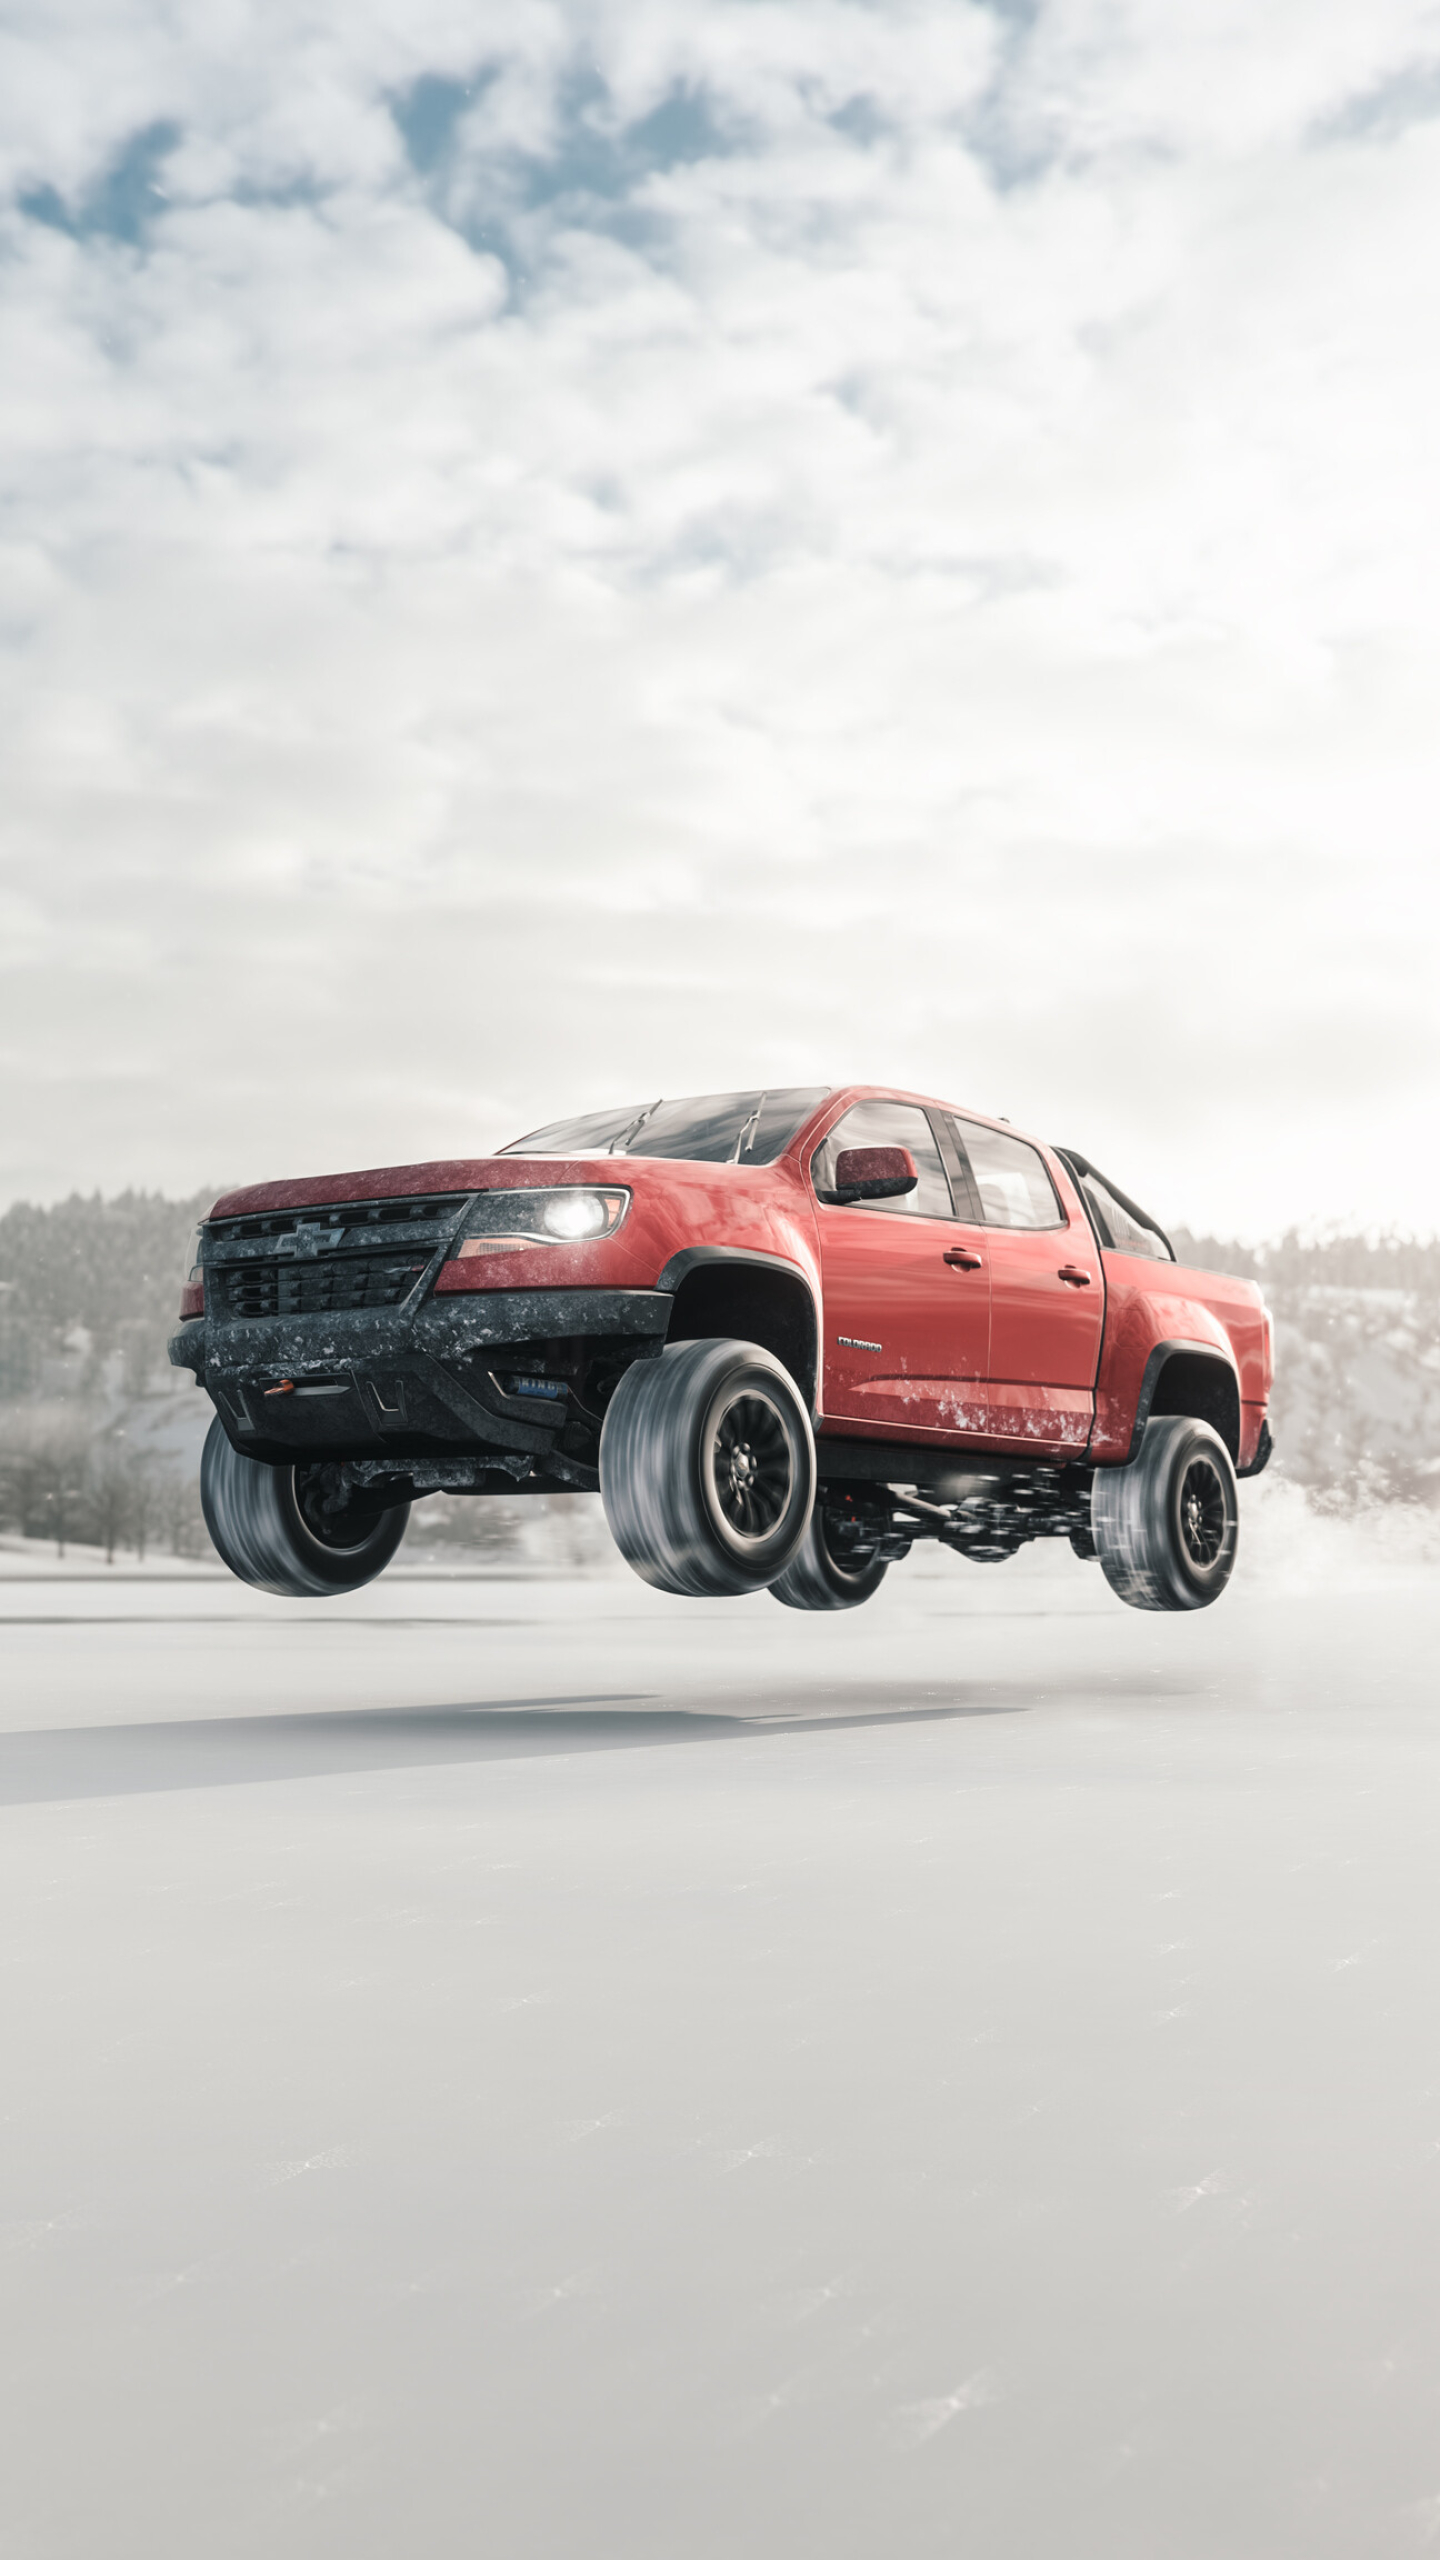 Chevrolet Silverado: American pickup truck, A unique formula of authentic off-road capability and innovative technology. 1440x2560 HD Wallpaper.